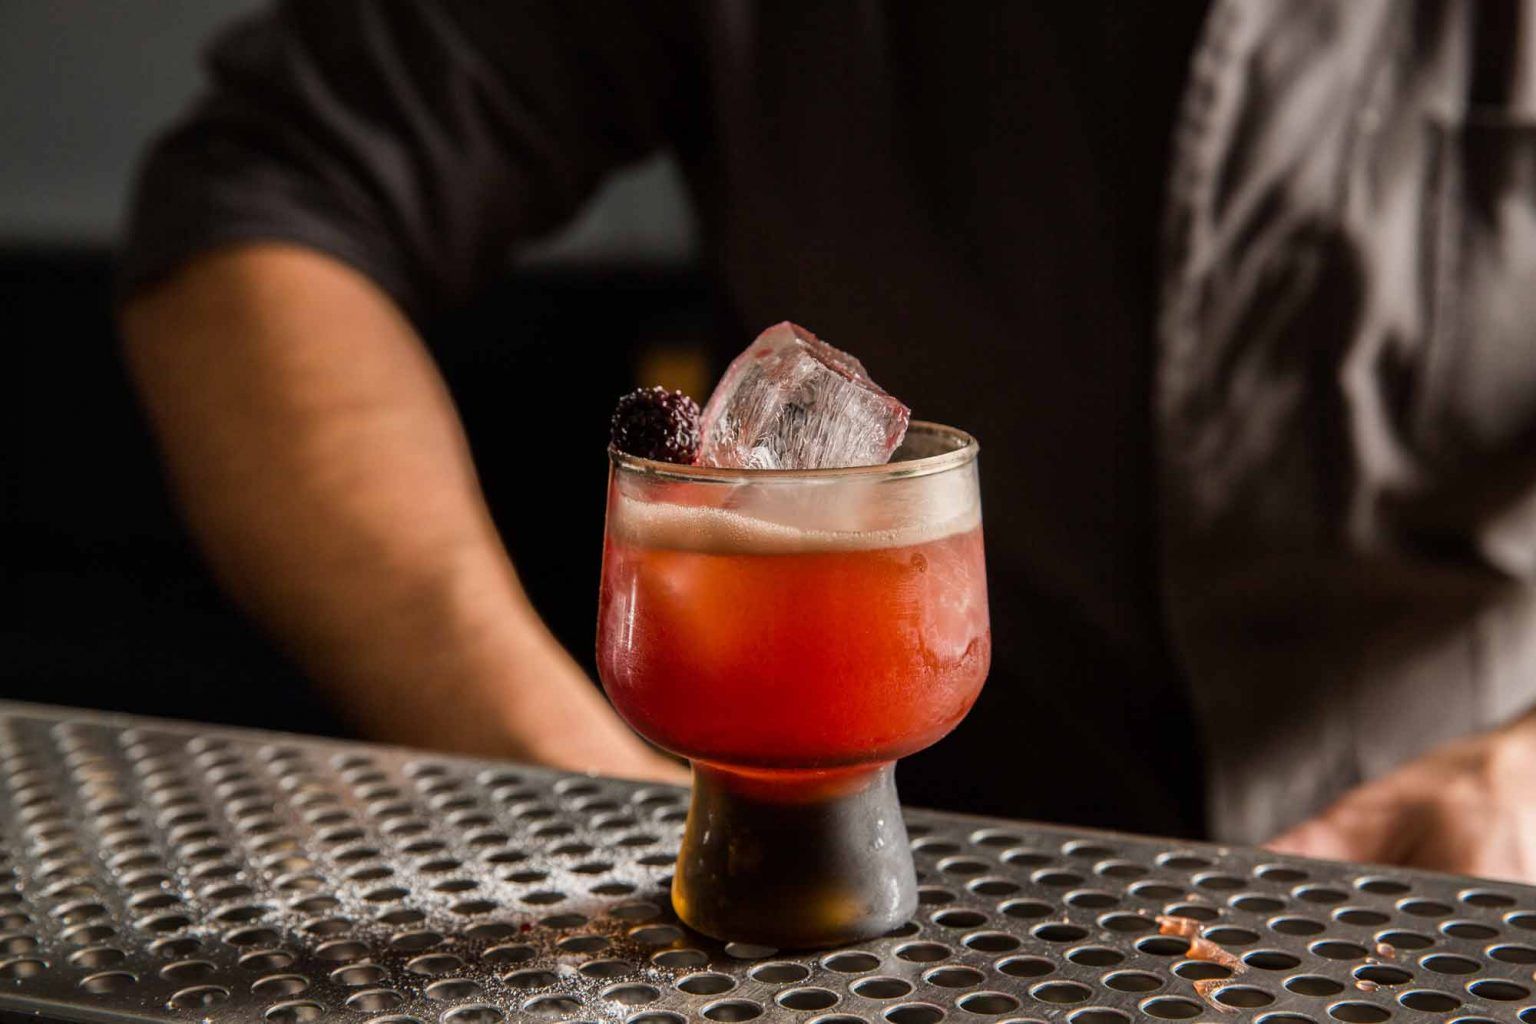 Amaro and creme de mure mark the H.S.L Special a standout